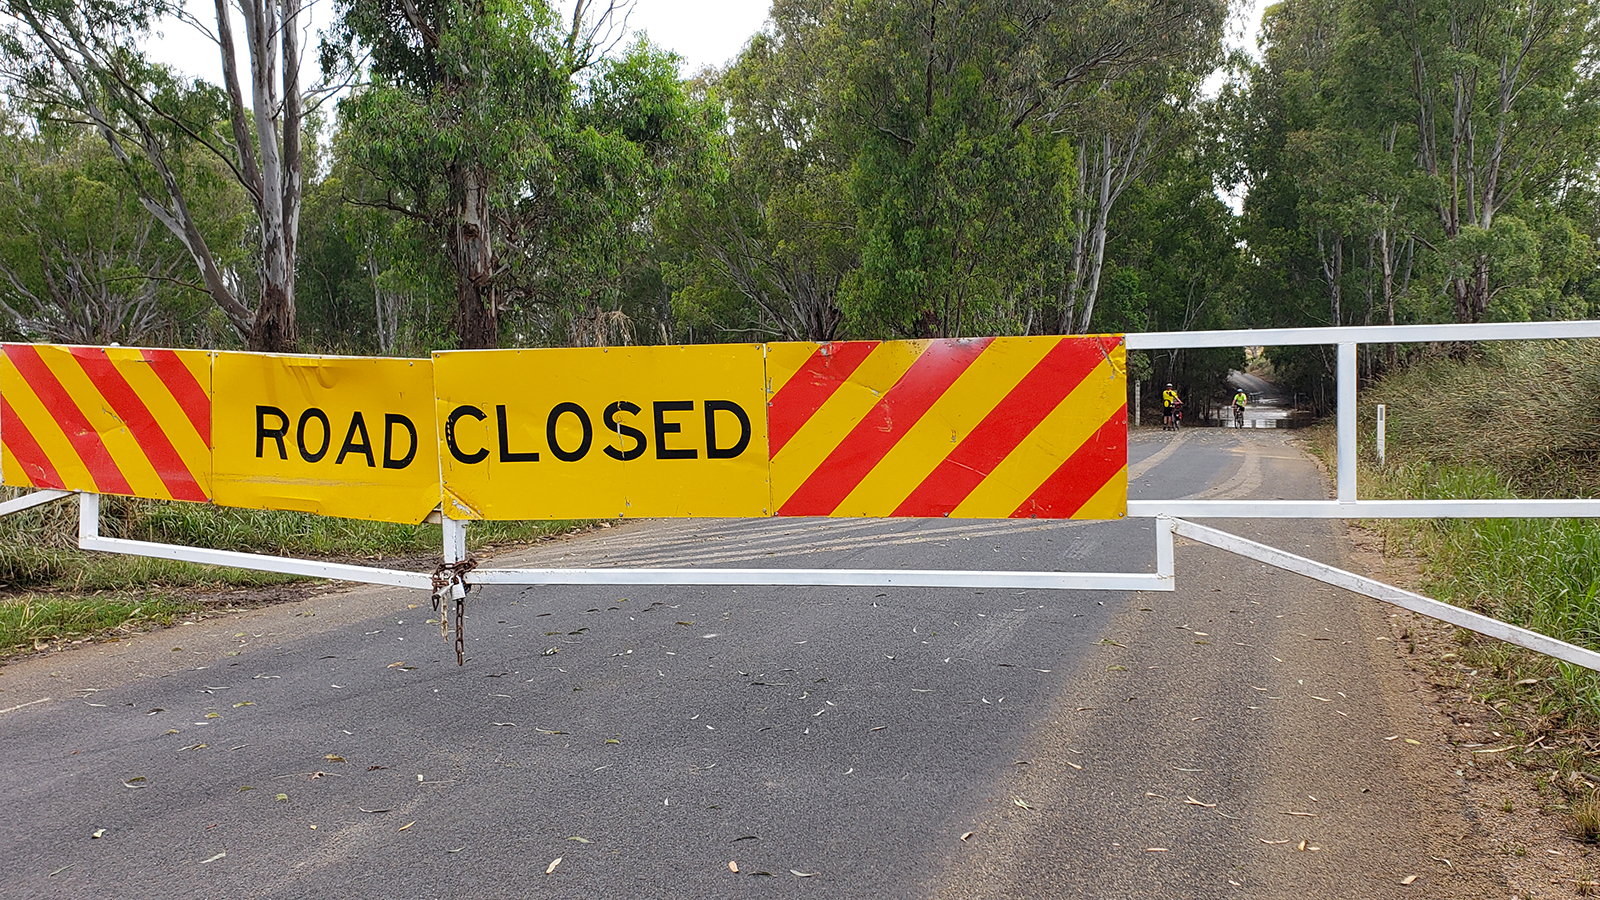 A flooded Lachlan River turned a 70km day into a 100km day!